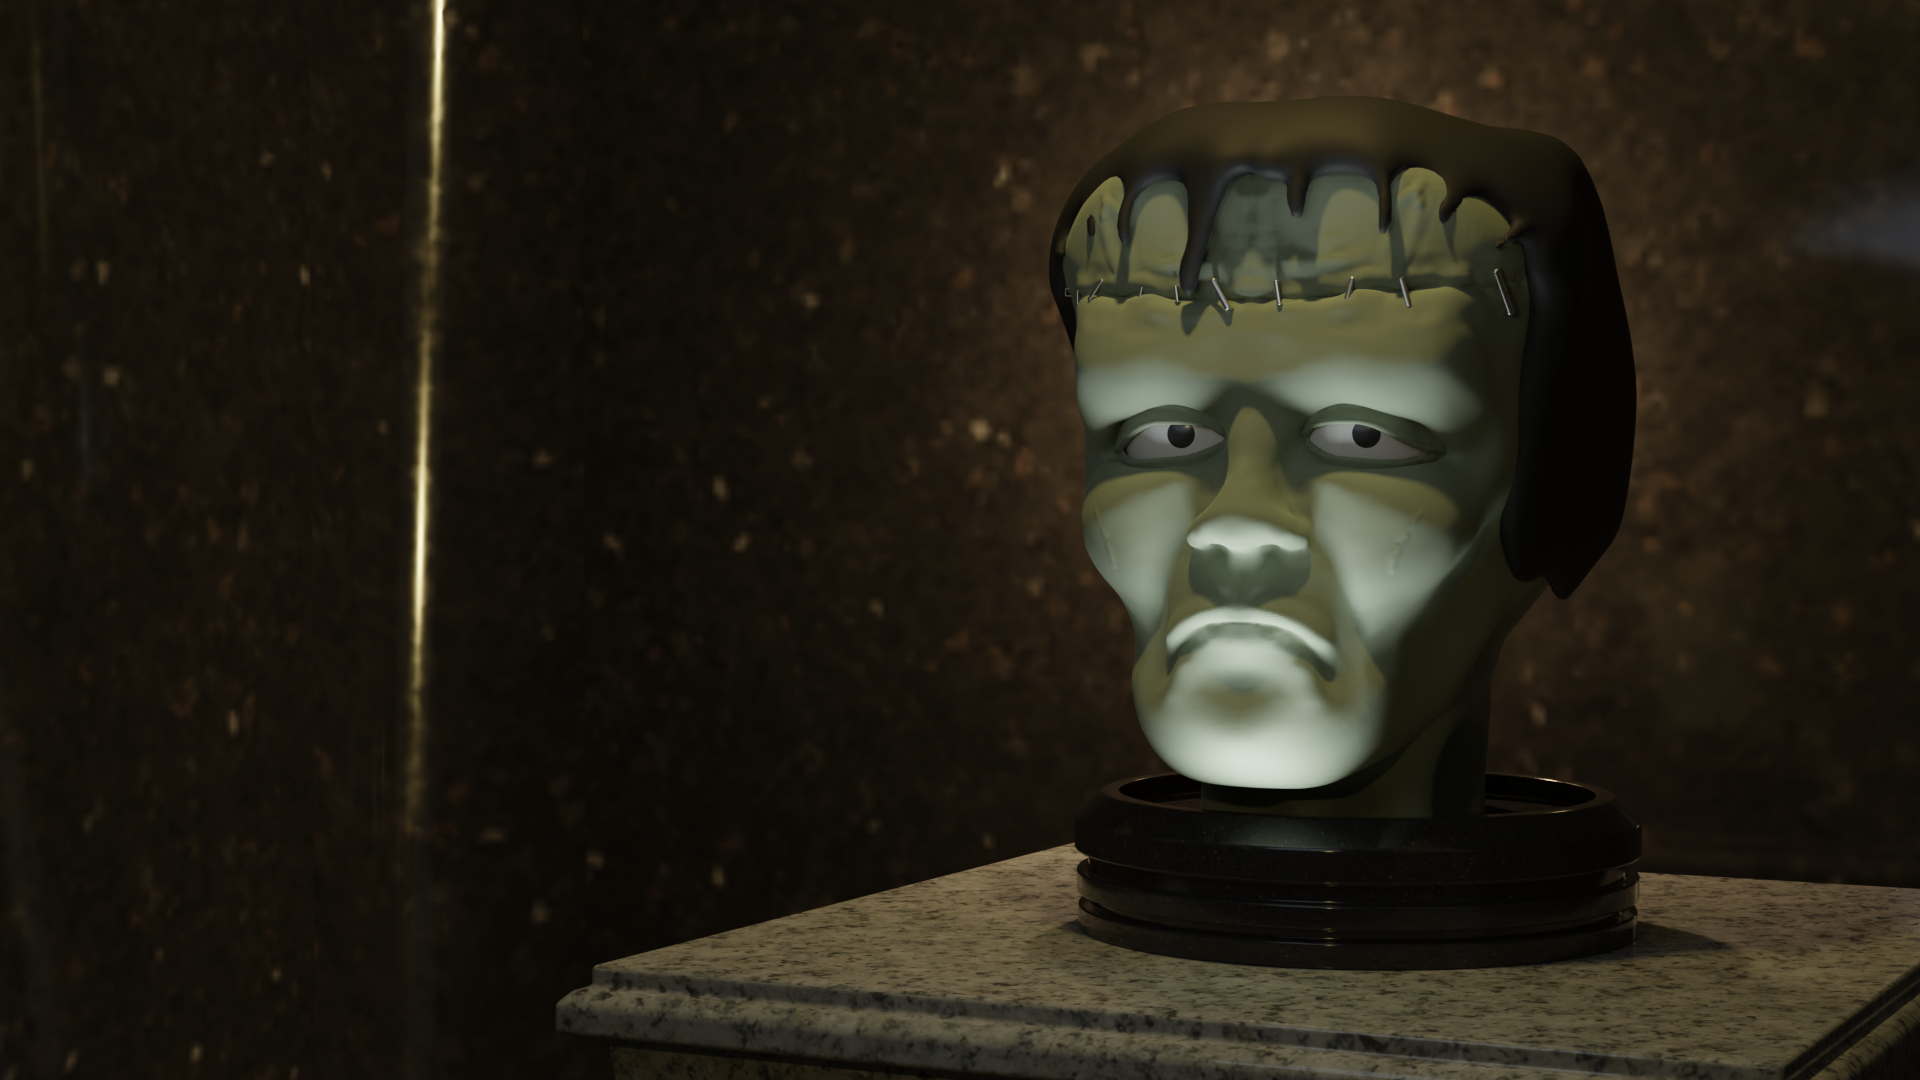 A blender render of frankenstein's head in a crypt-like setting